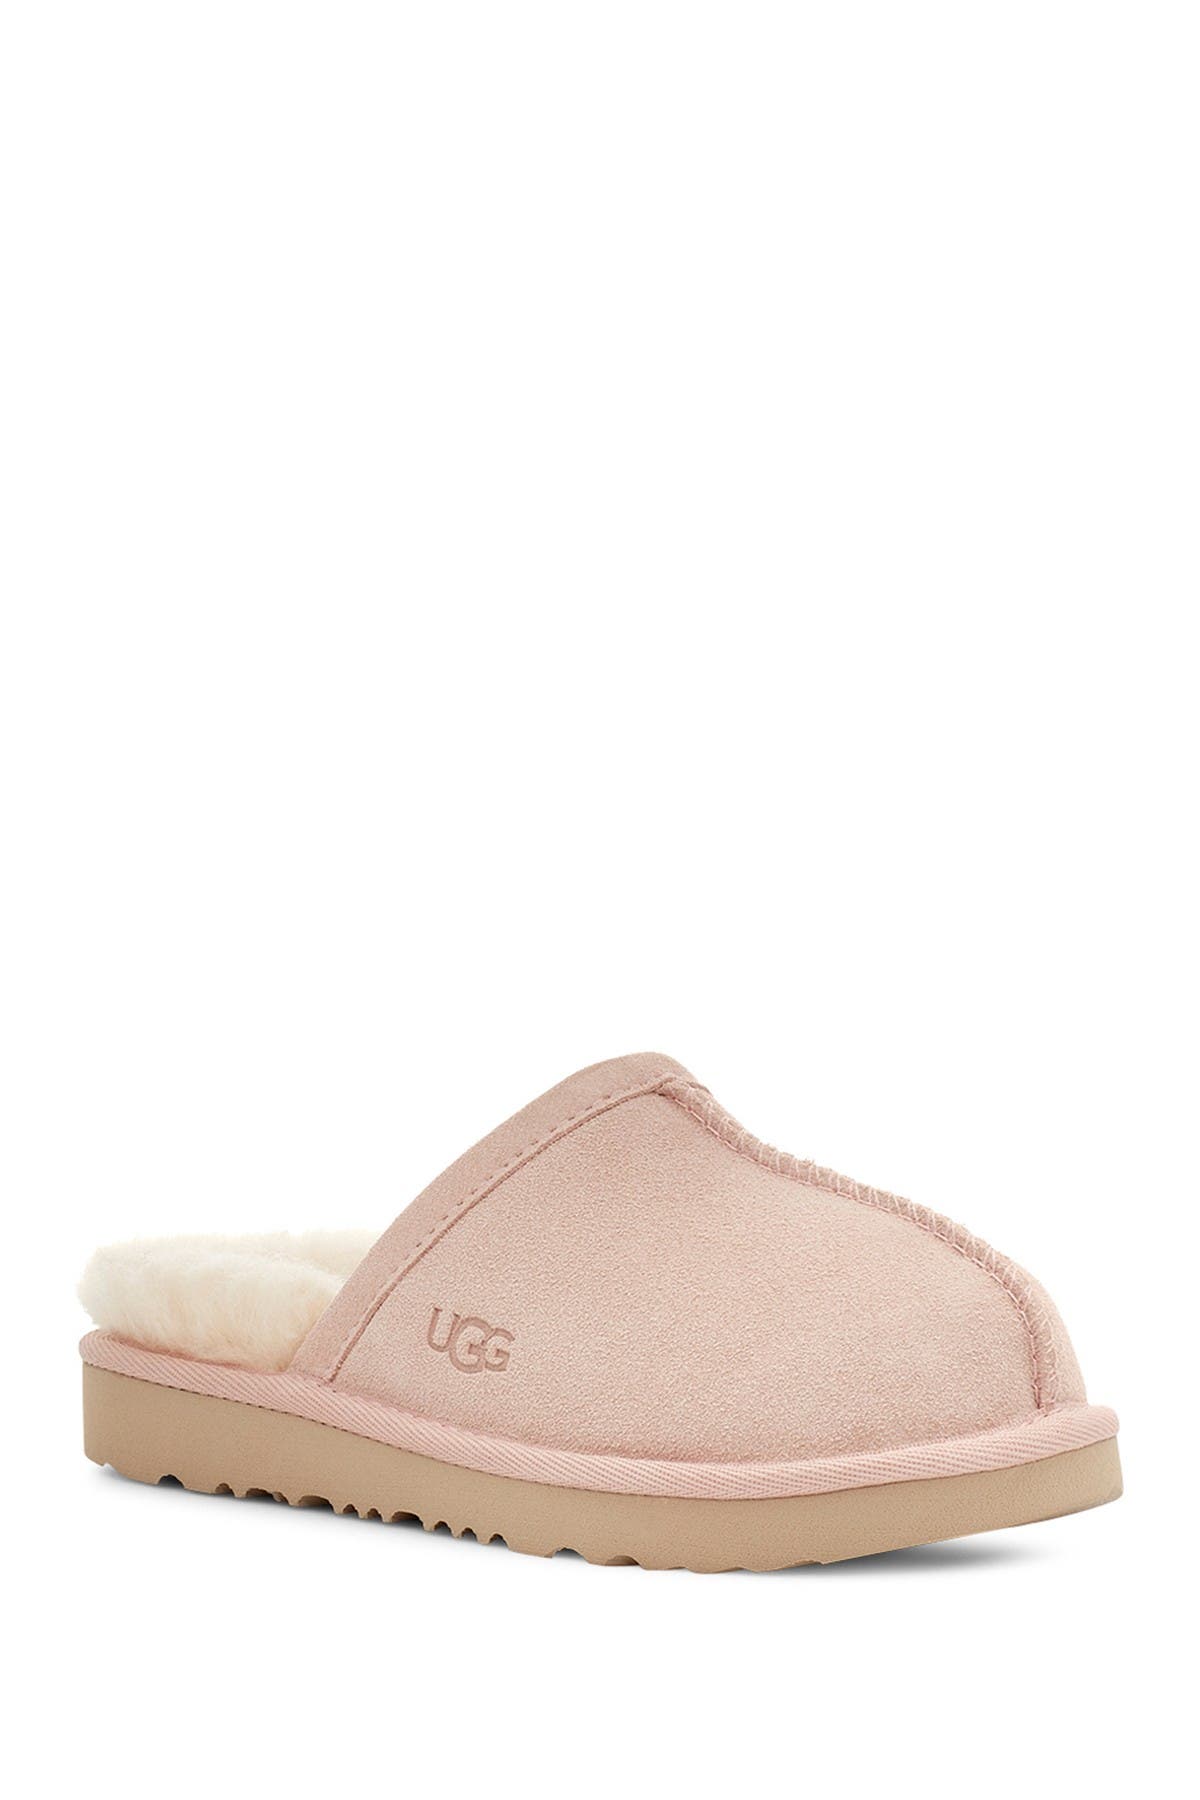 ugg slippers junior size 4